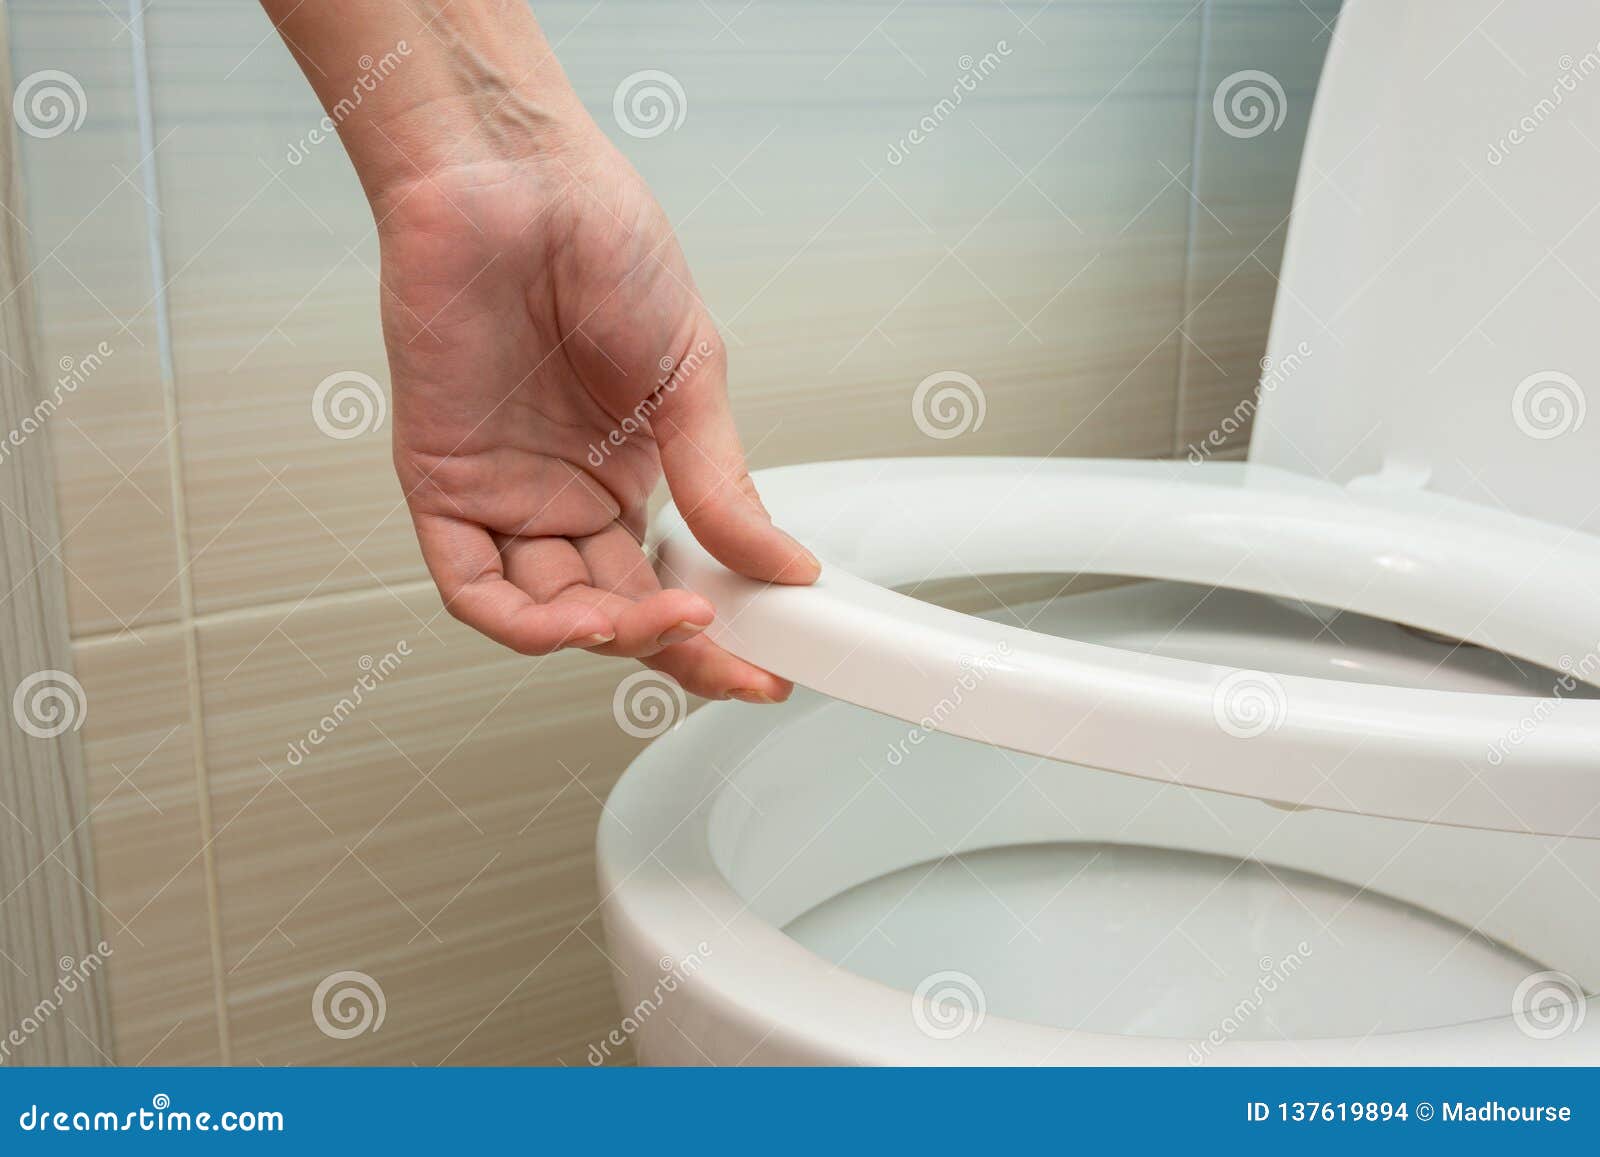 Cleaning Wiping Toilet Seat Stock Photo - Download Image 